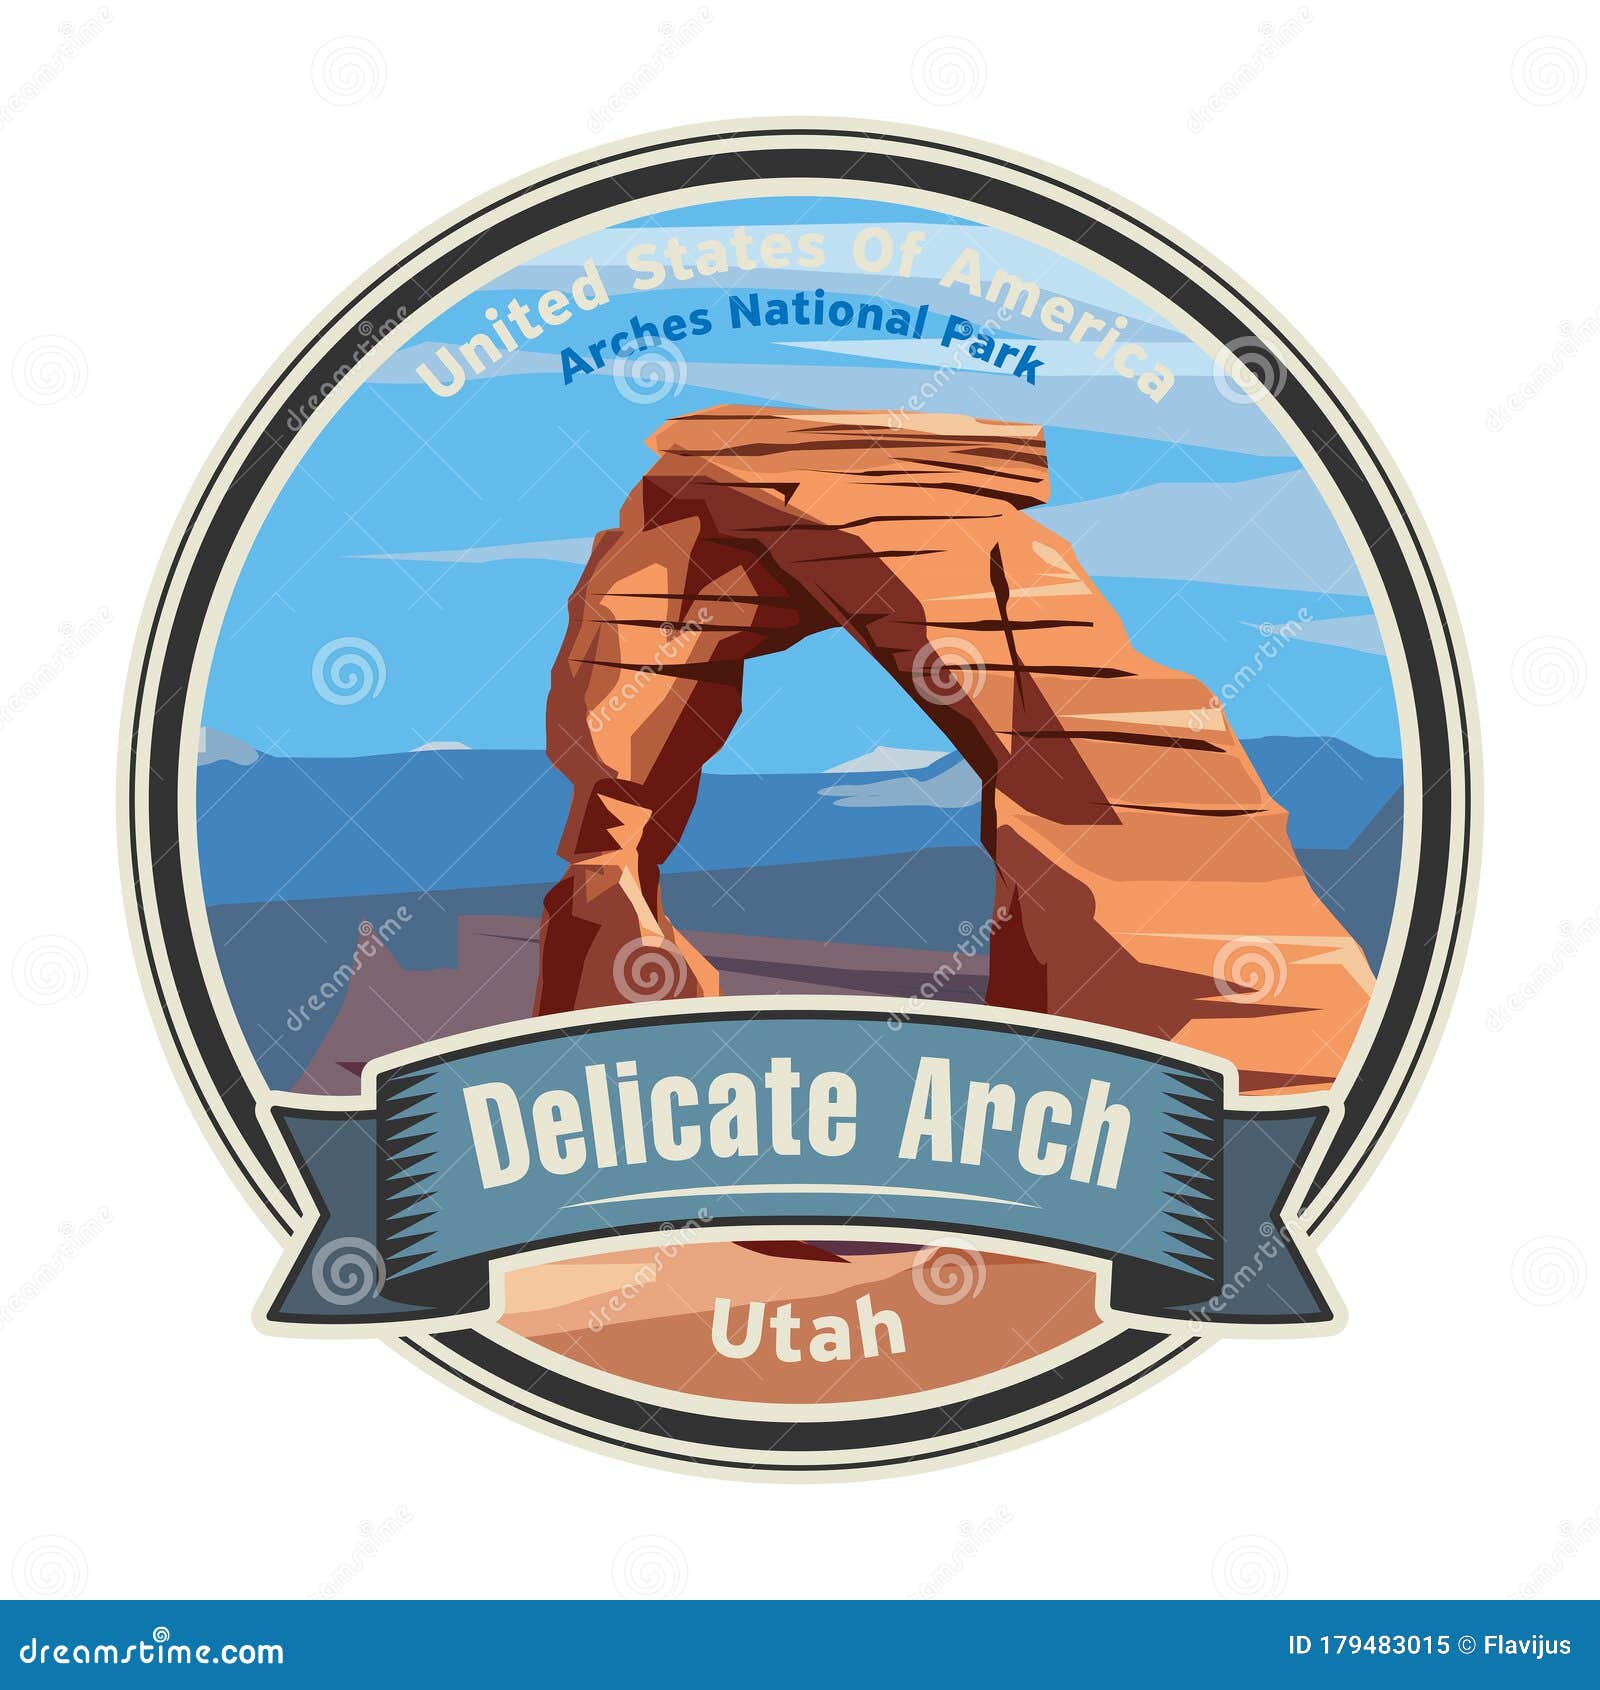 delicate arch in arches national park, utah, united states